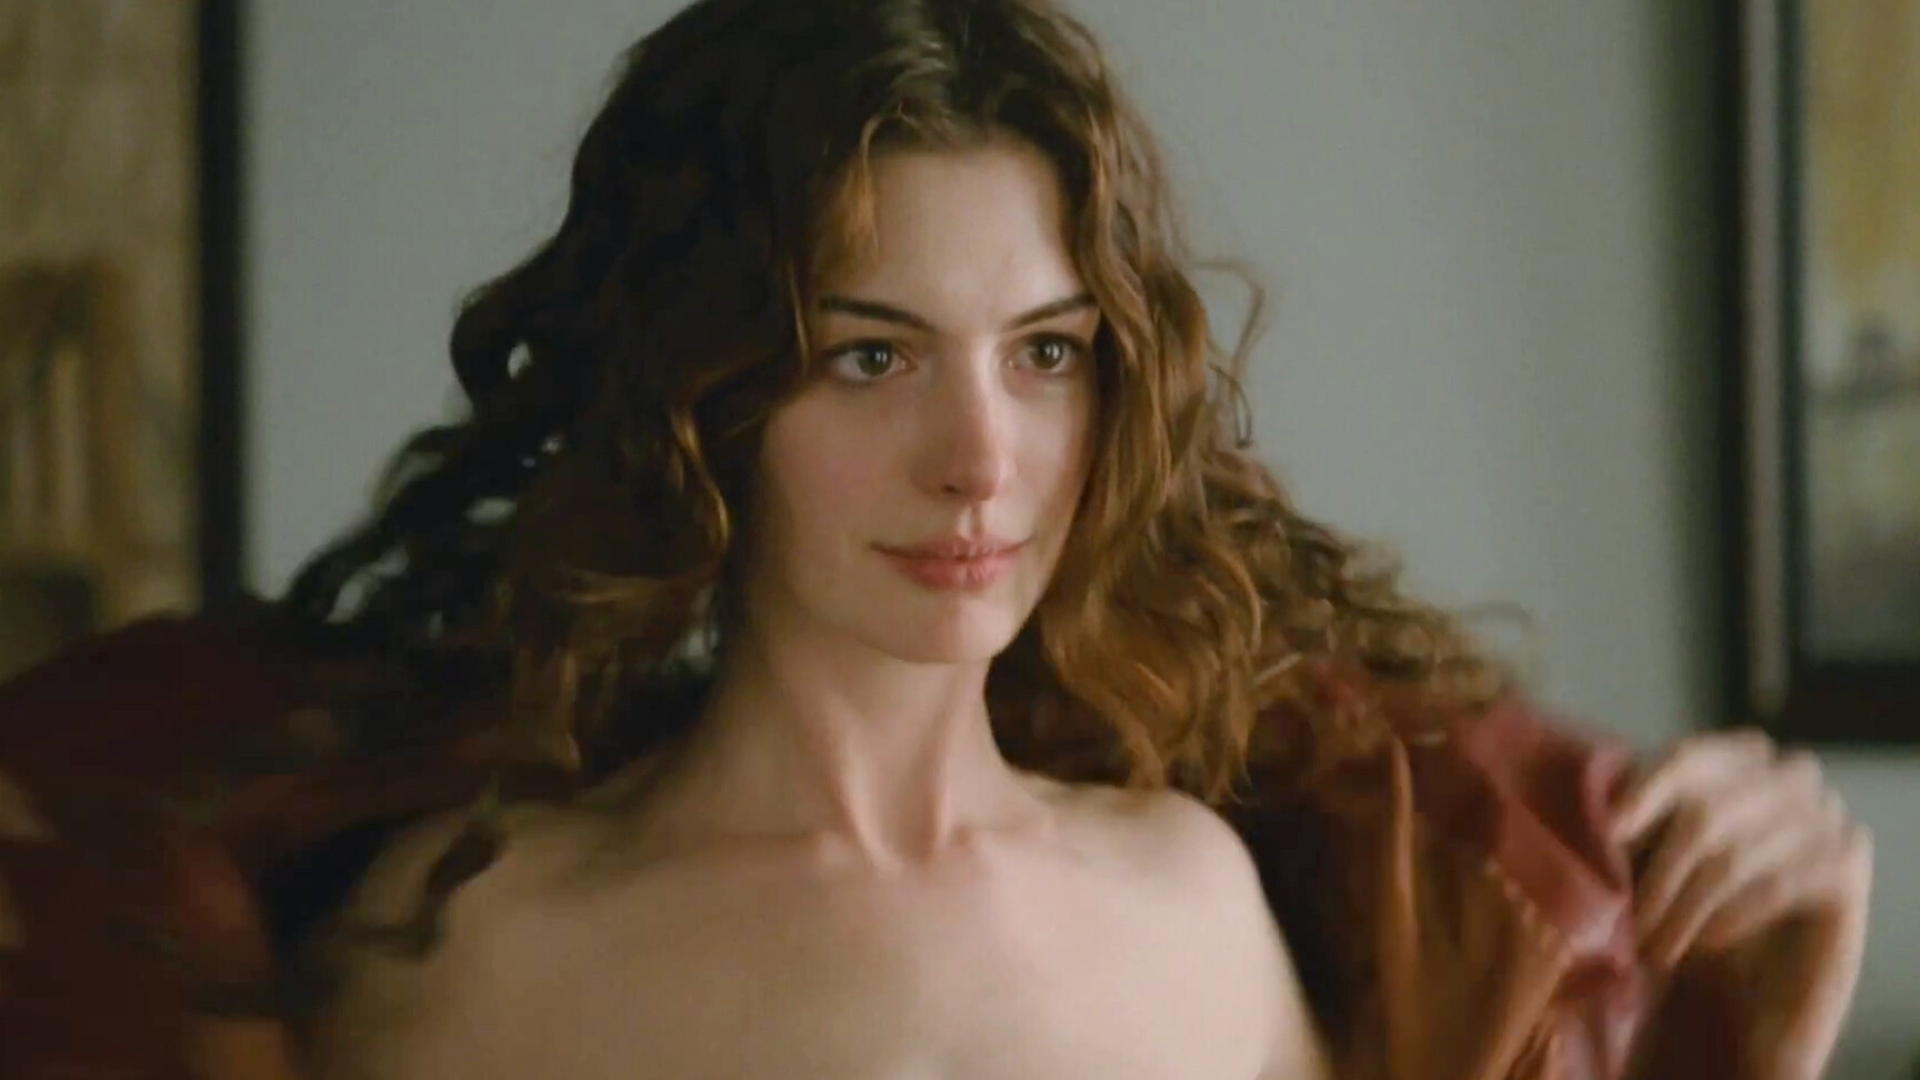 Love and Other Drugs: Best Actress Award for Anne Hathaway at the Satellite Awards 2010, A 2010 romantic drama film. 1920x1080 Full HD Background.